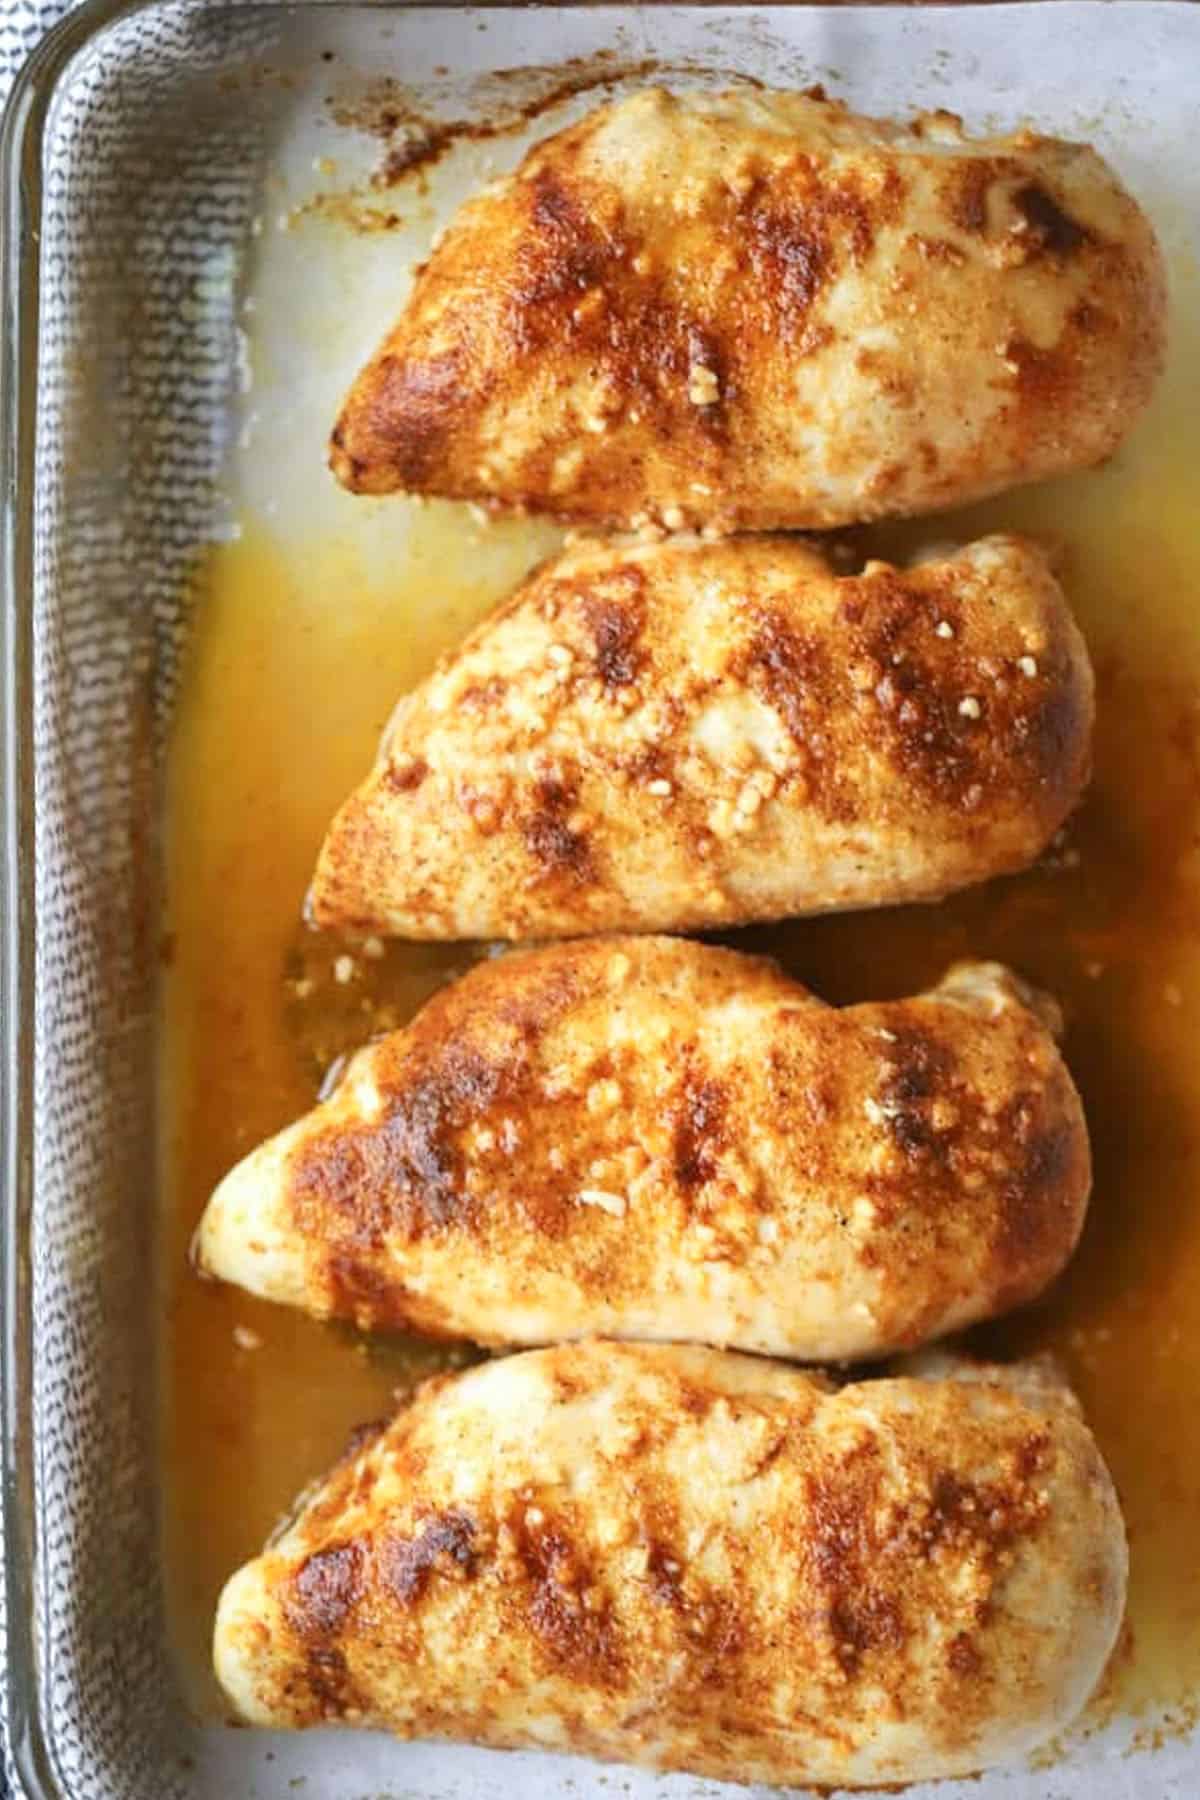 Simple Oven Baked Chicken Breast {Video} - The Carefree Kitchen